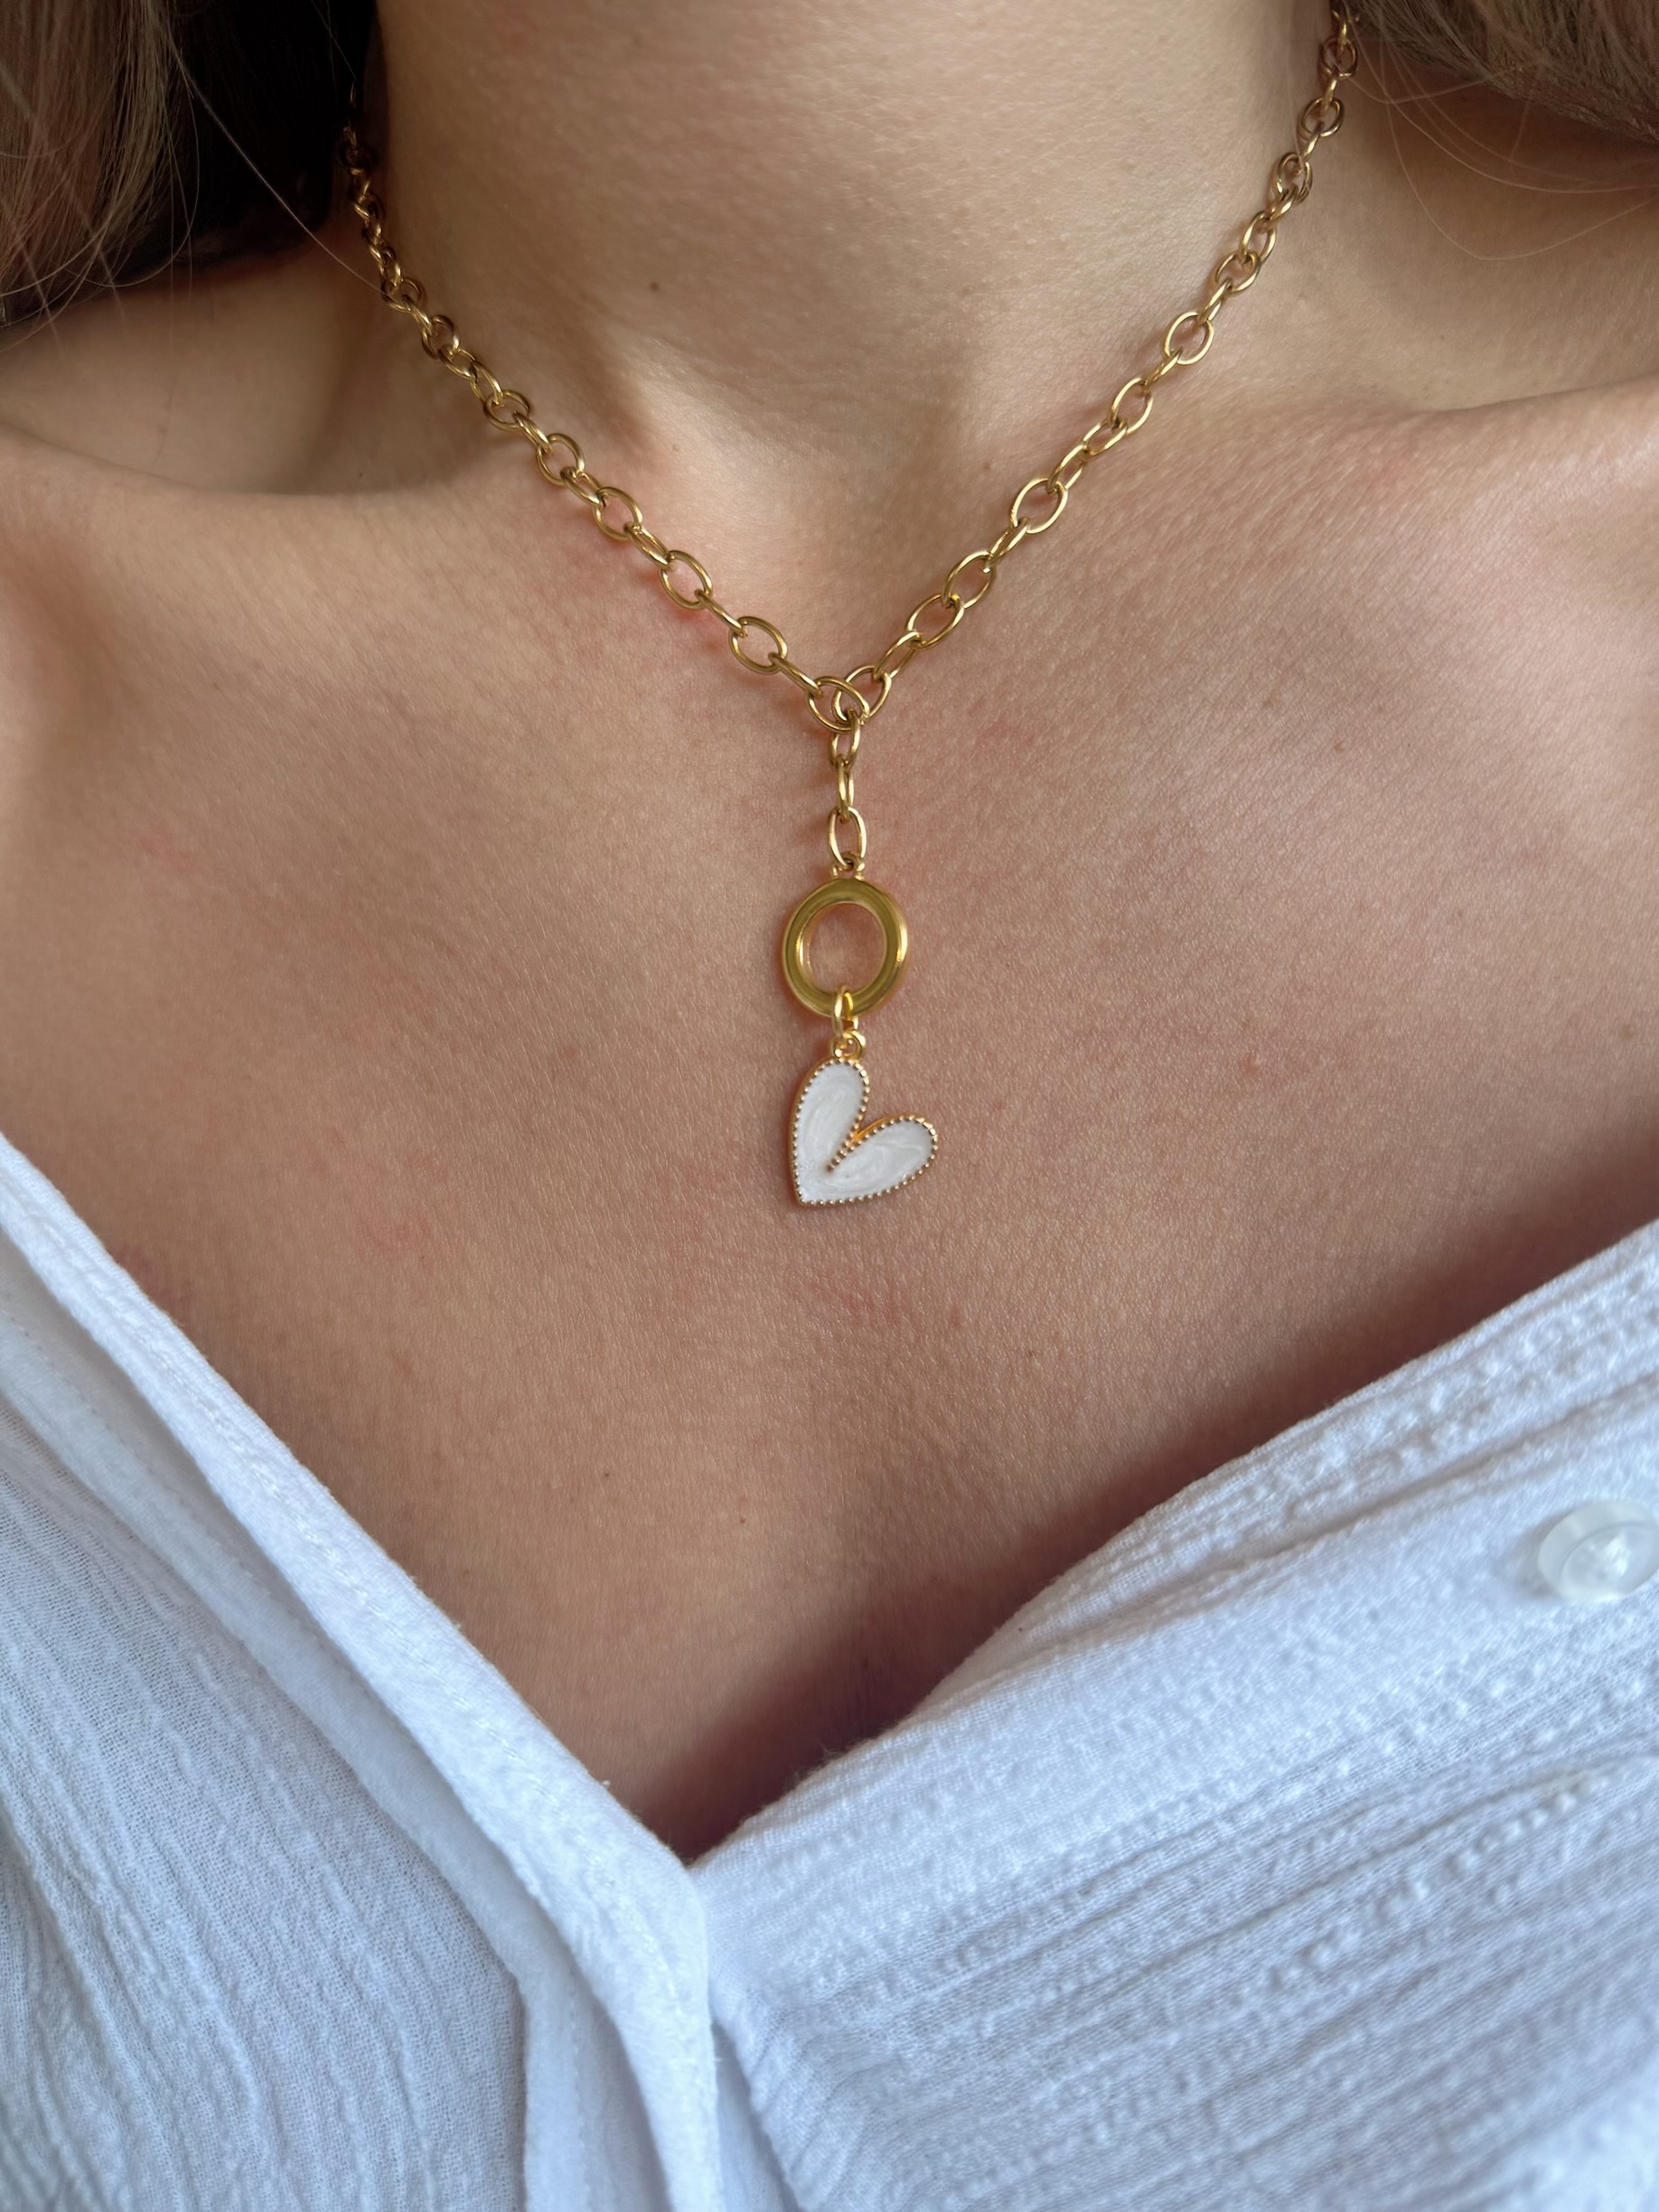 Lausanne Necklace - Pearl Chunky Pendant Necklace in Gold | Showpo USA